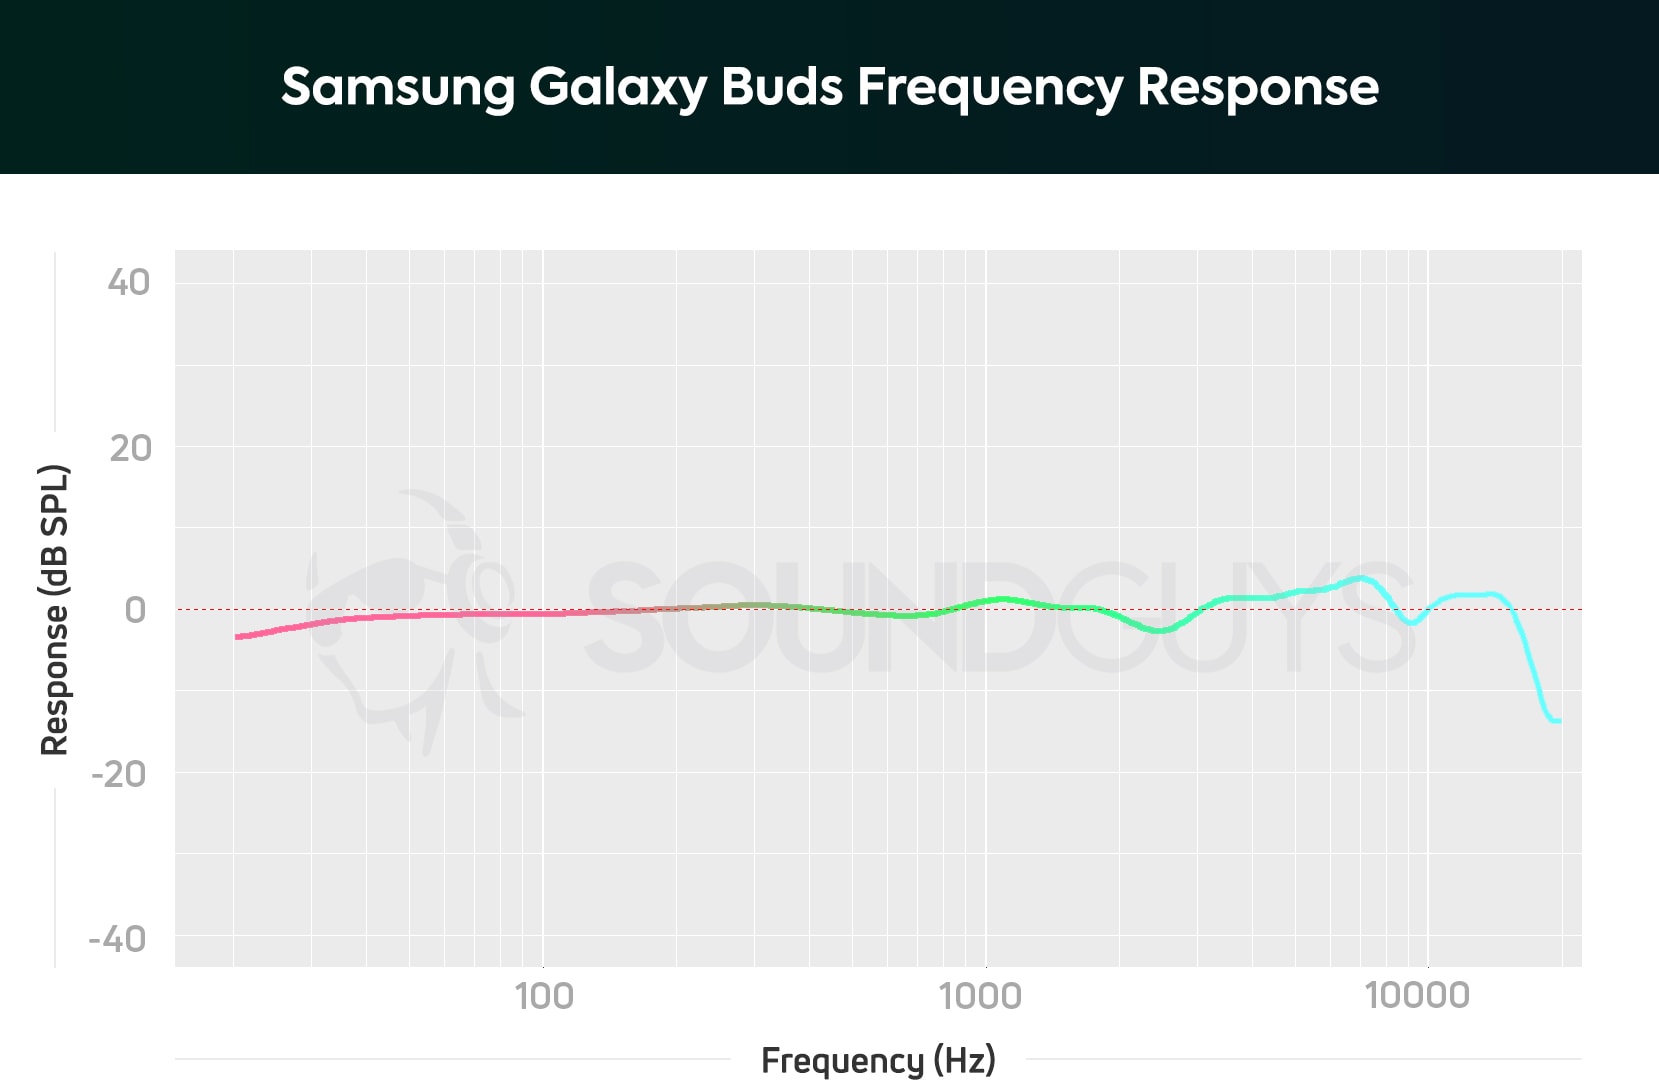 Frequency response chart of the Samsung Galaxy Buds.